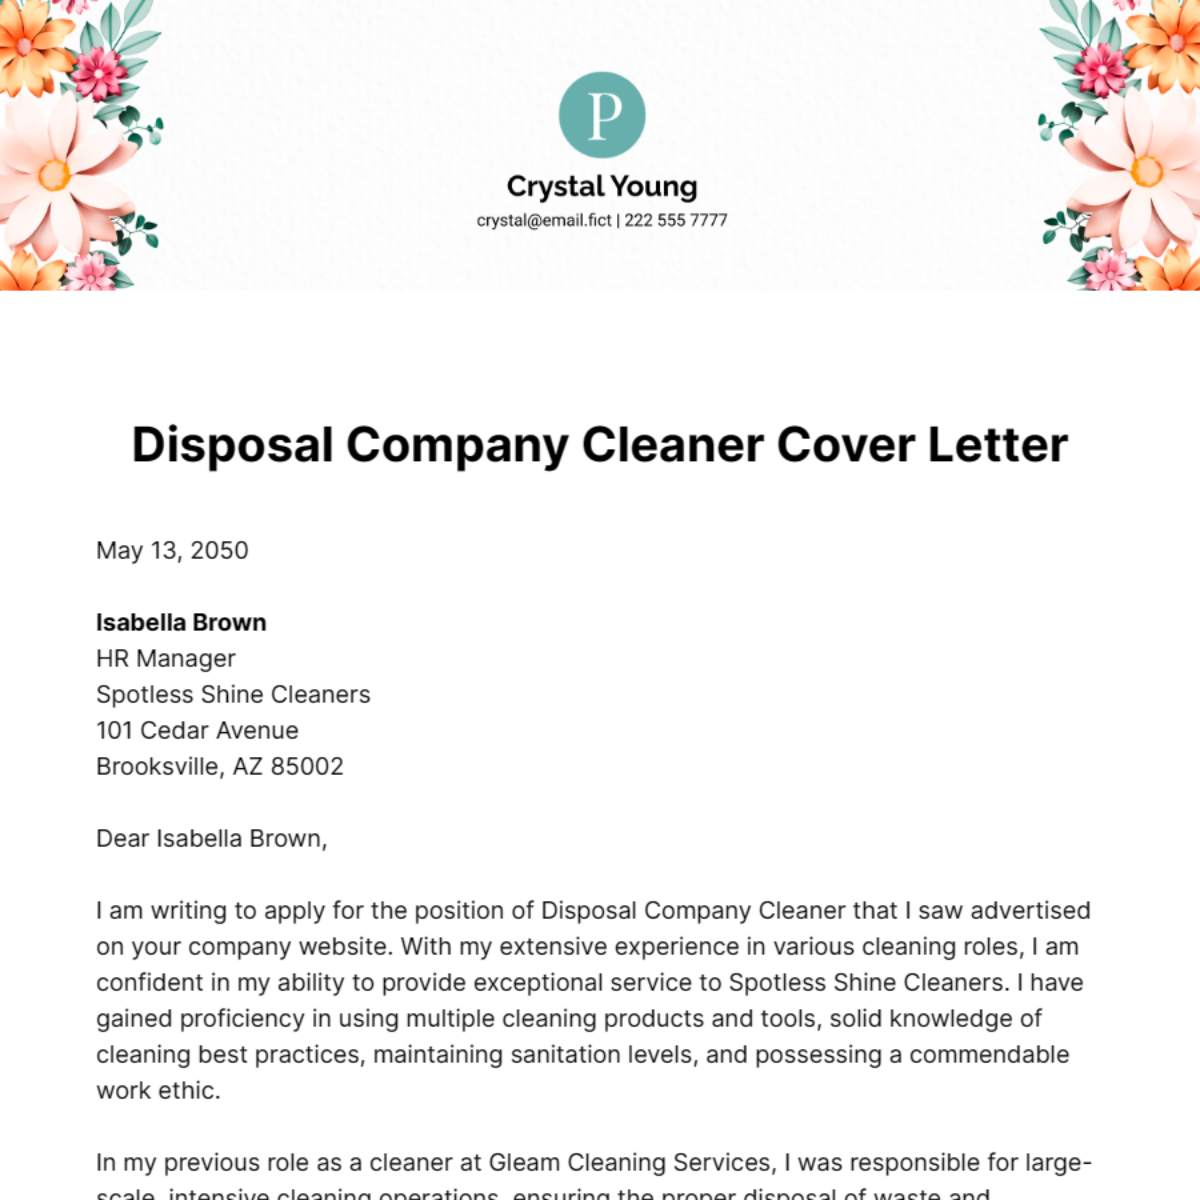 Disposal Company Cleaner Cover Letter Template